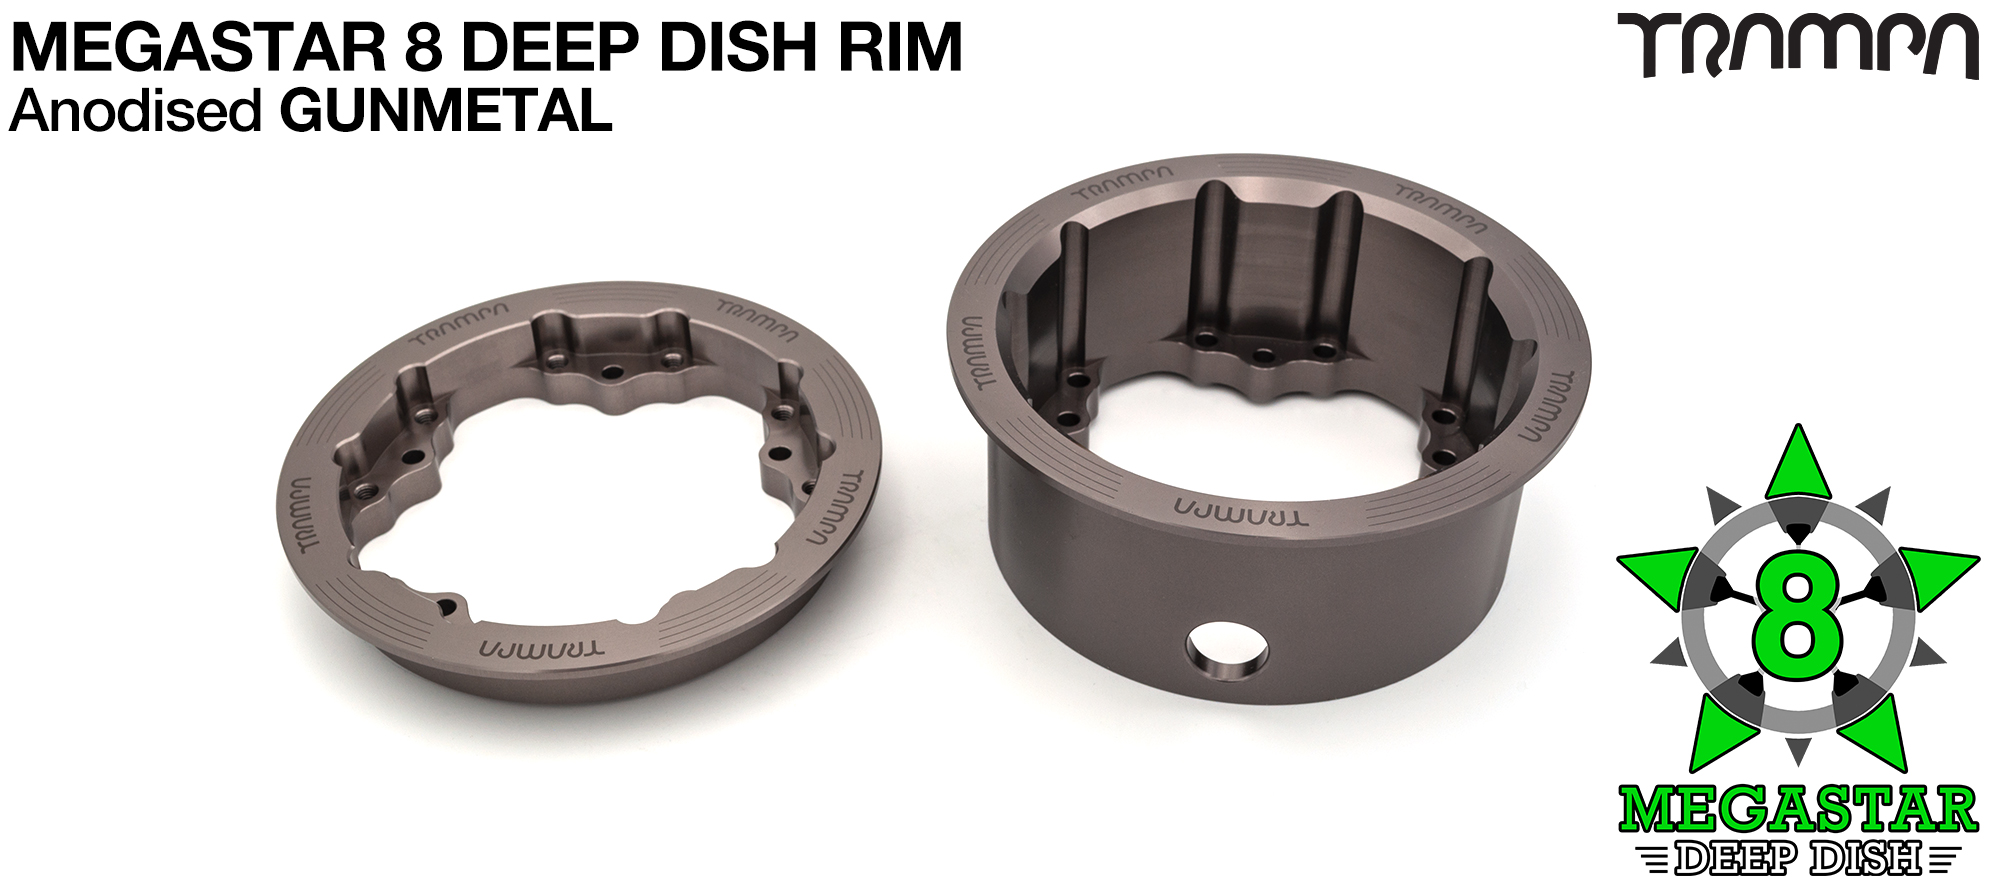 MEGASTAR 8 DEEP-DISH Rims Measure 3.75 x 2.5 Inch. The bearings are positioned OFF-SET widening the wheel base & accept all 3.75 Rim Tyres - GUNMETAL